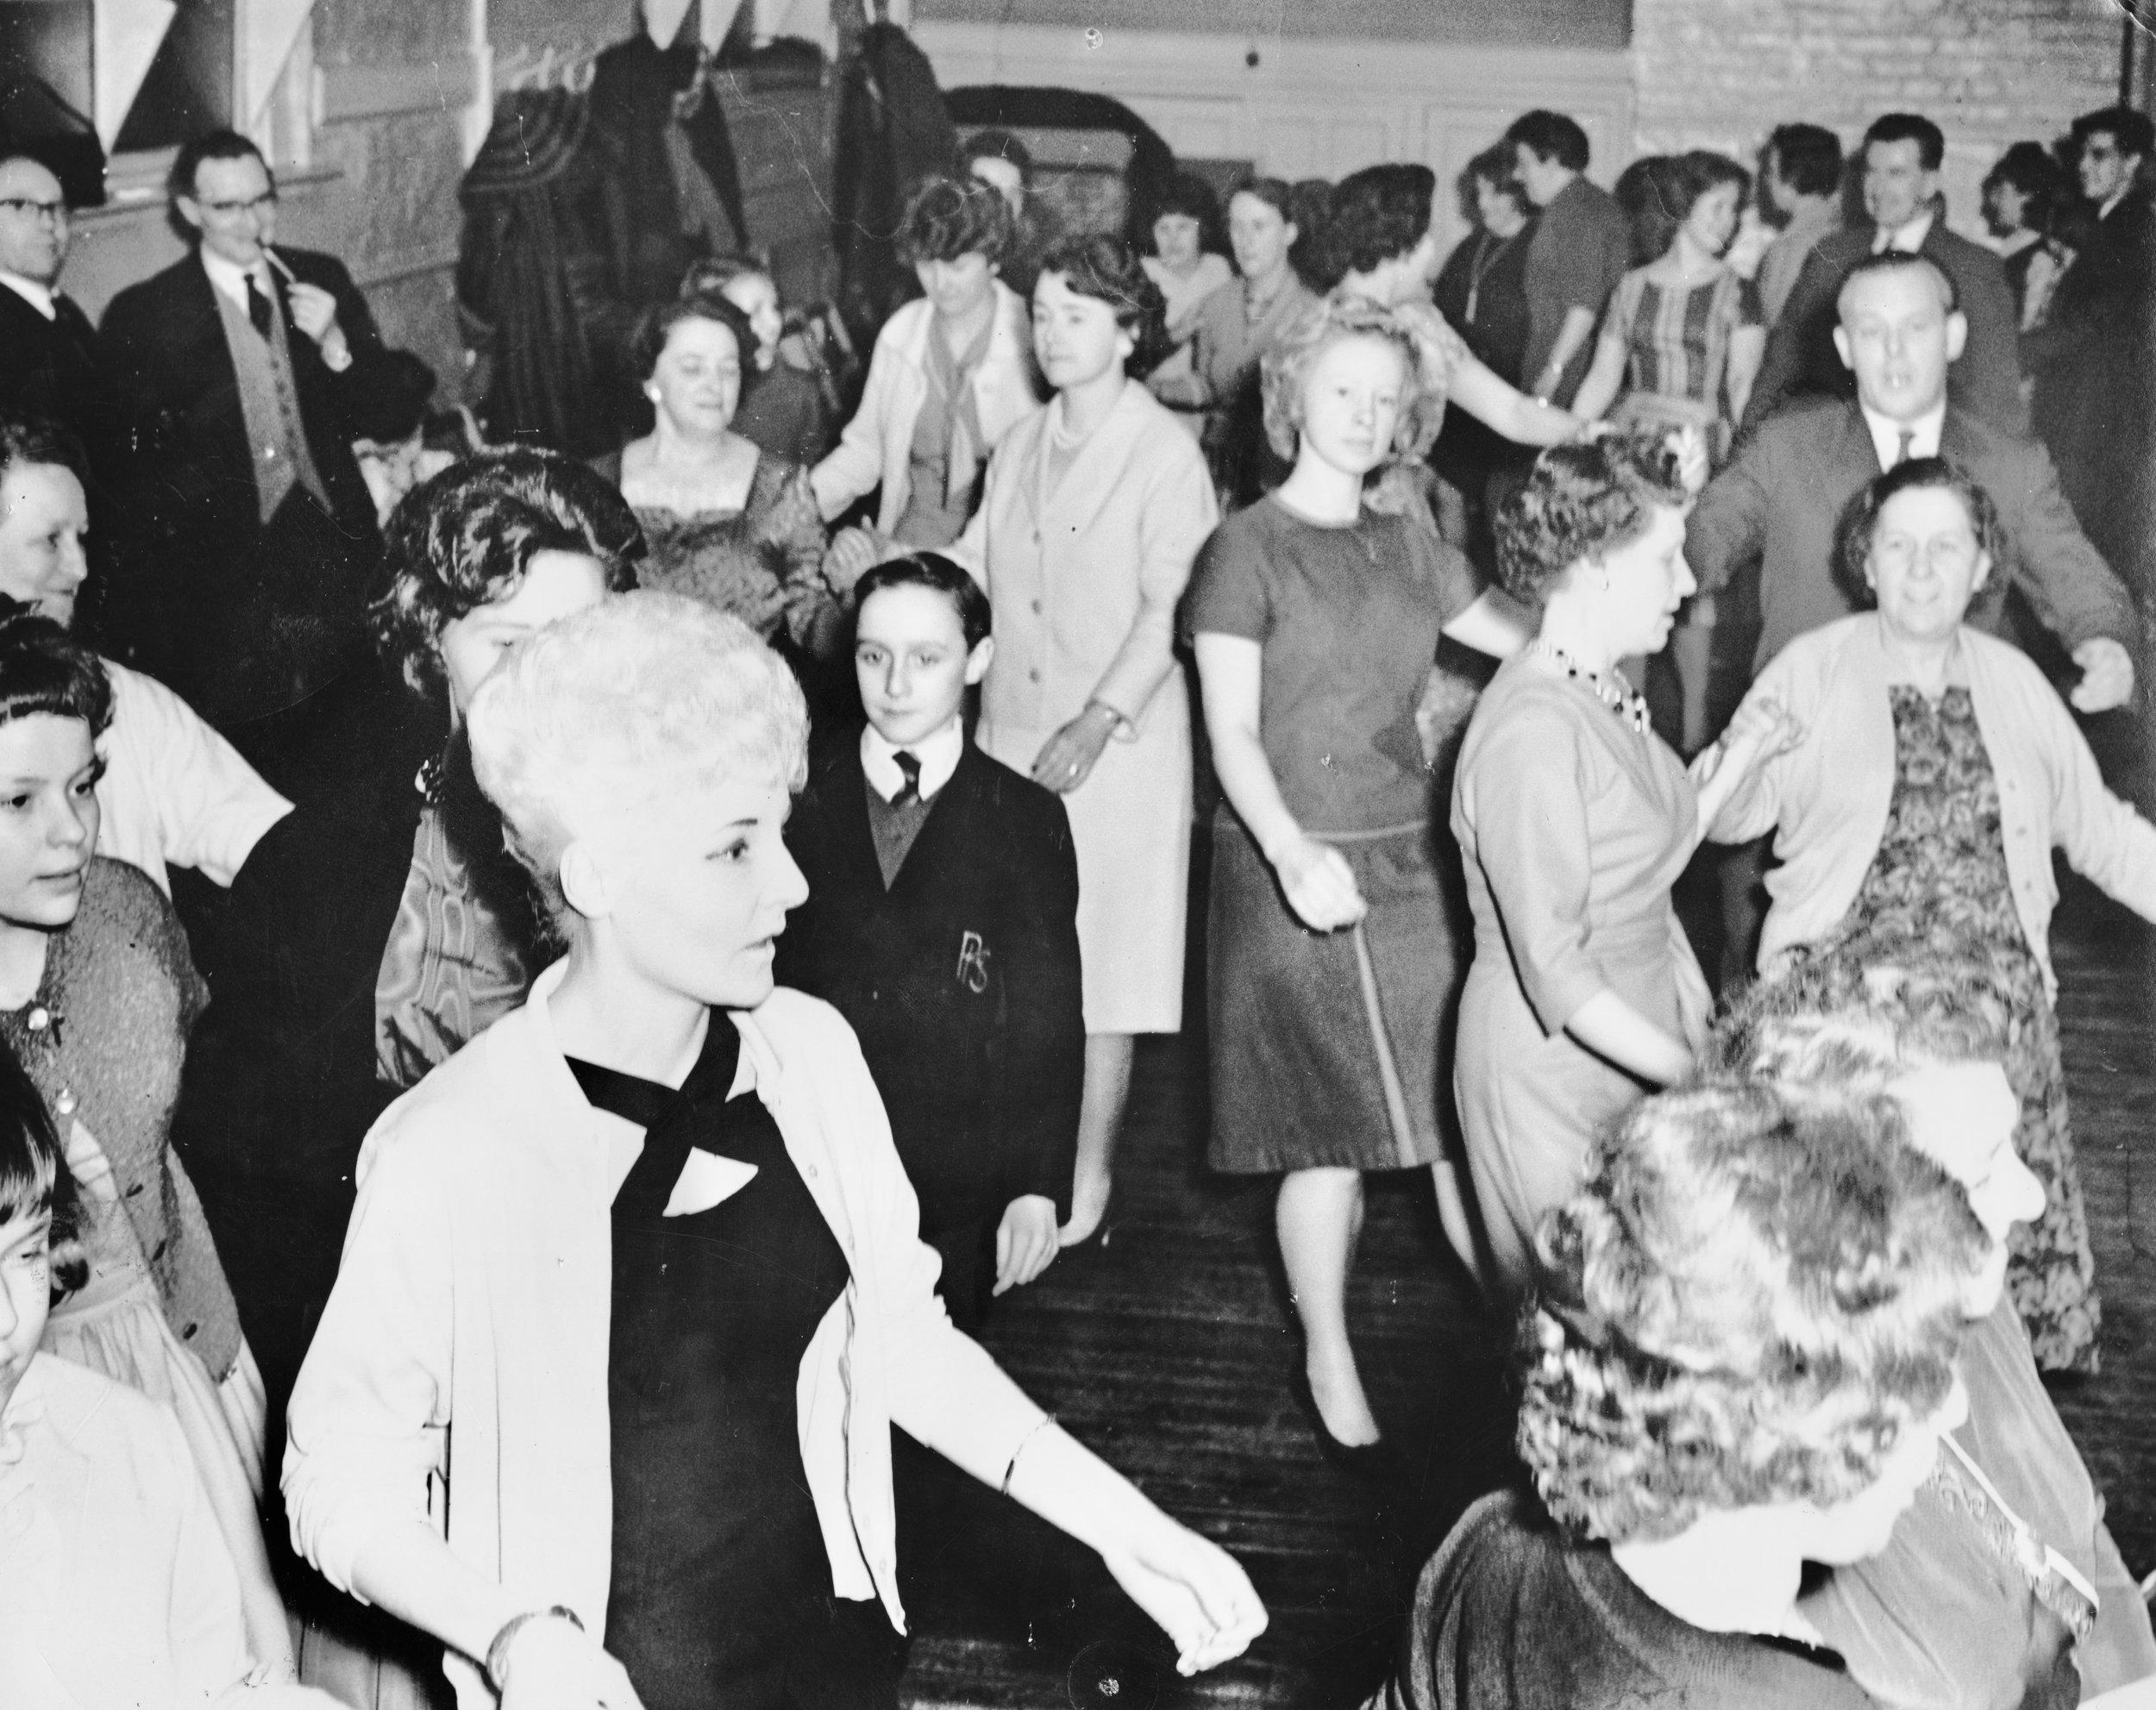 A dance upstairs in the Old School in All Saints' Street about 1956.